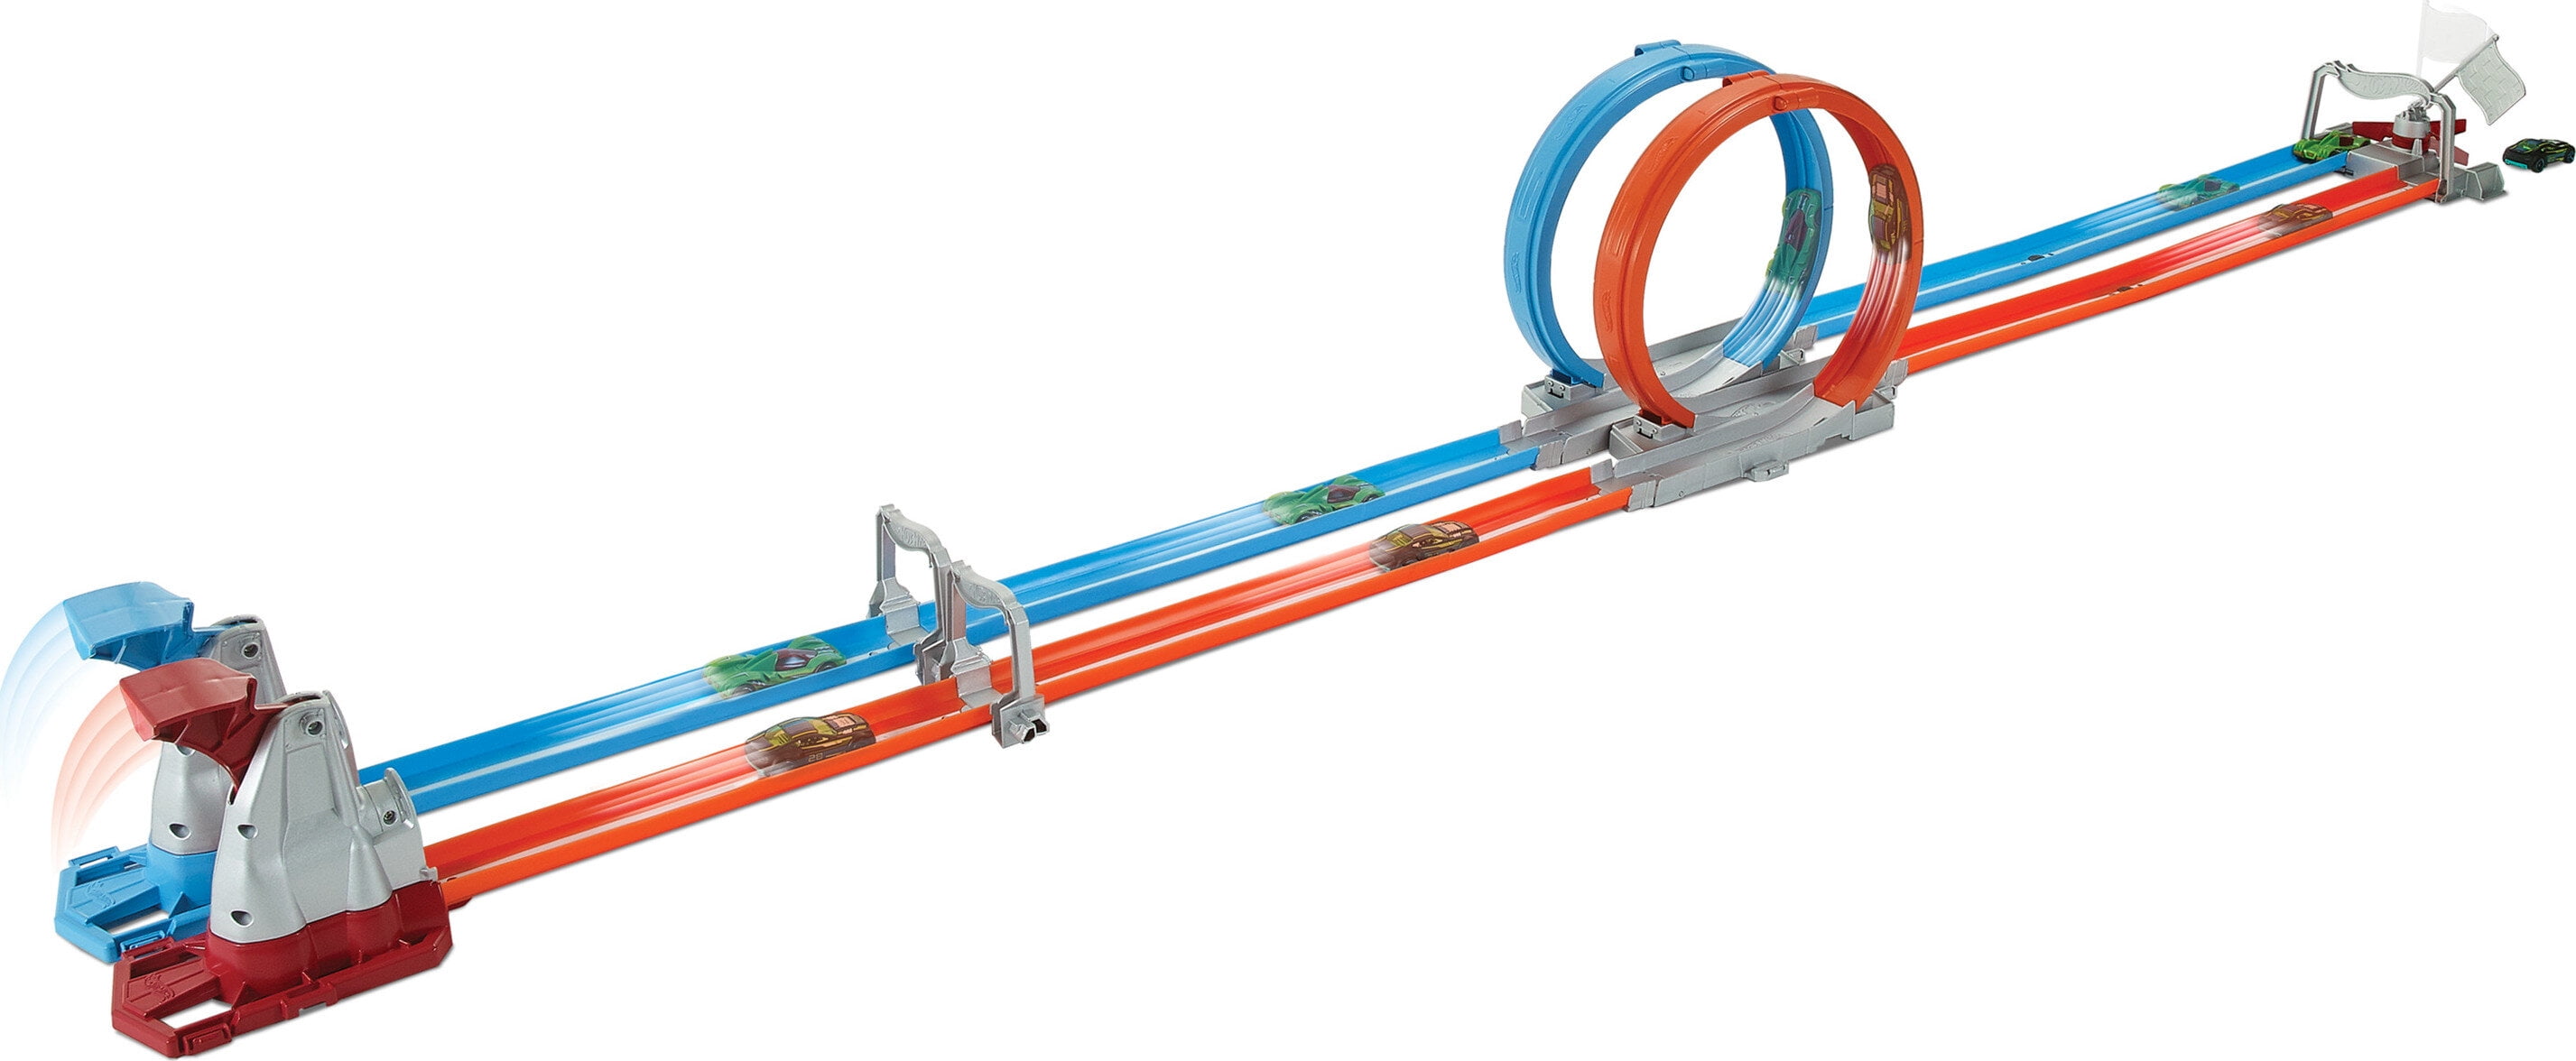 12' Hot Wheels Double Loop Dash Race Track Set w/ 2 Toy Cars $18 + Free Shipping w/ Walmart + or on $35+